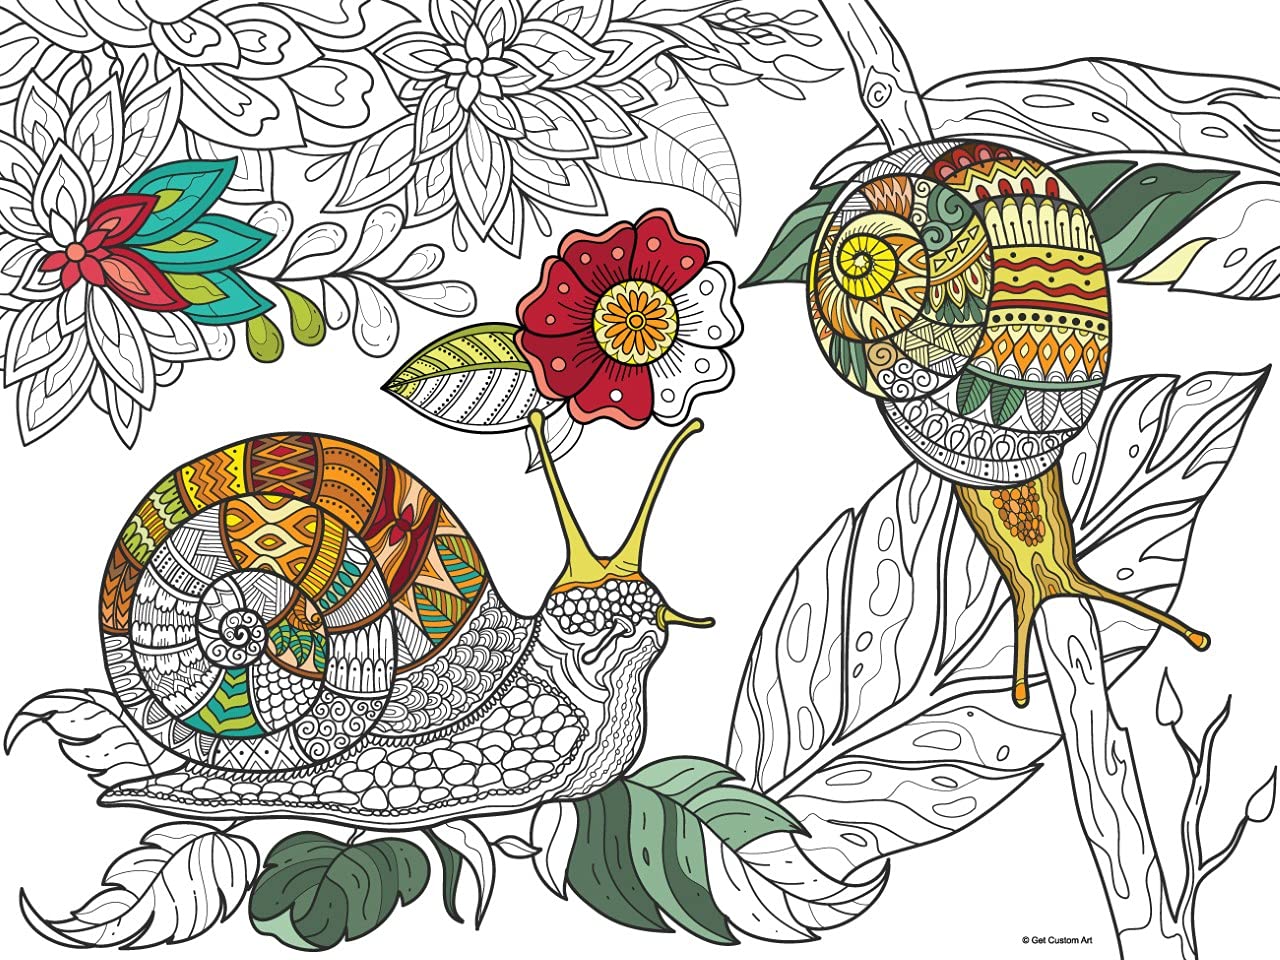 Snails Coloring Poster – Animal Art for Kids and Adults | DIY Stress Relief Coloring Poster